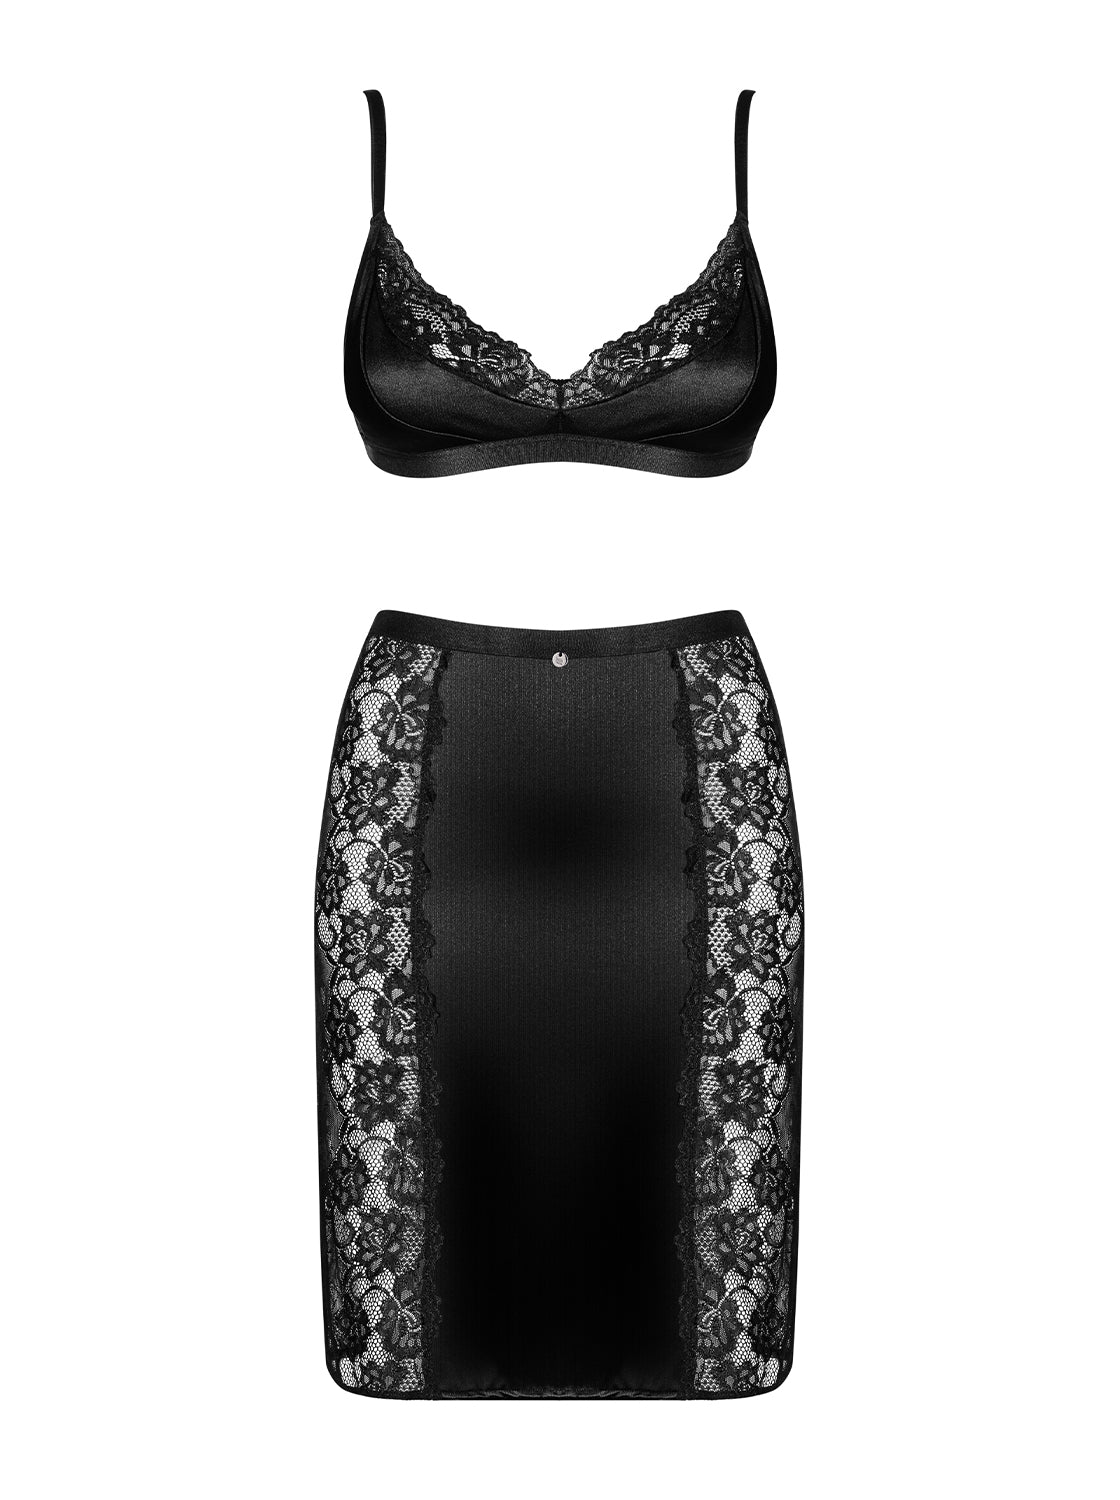 Blanita a fantastic black bra and skirt set made of shiny satin material with beautiful lace